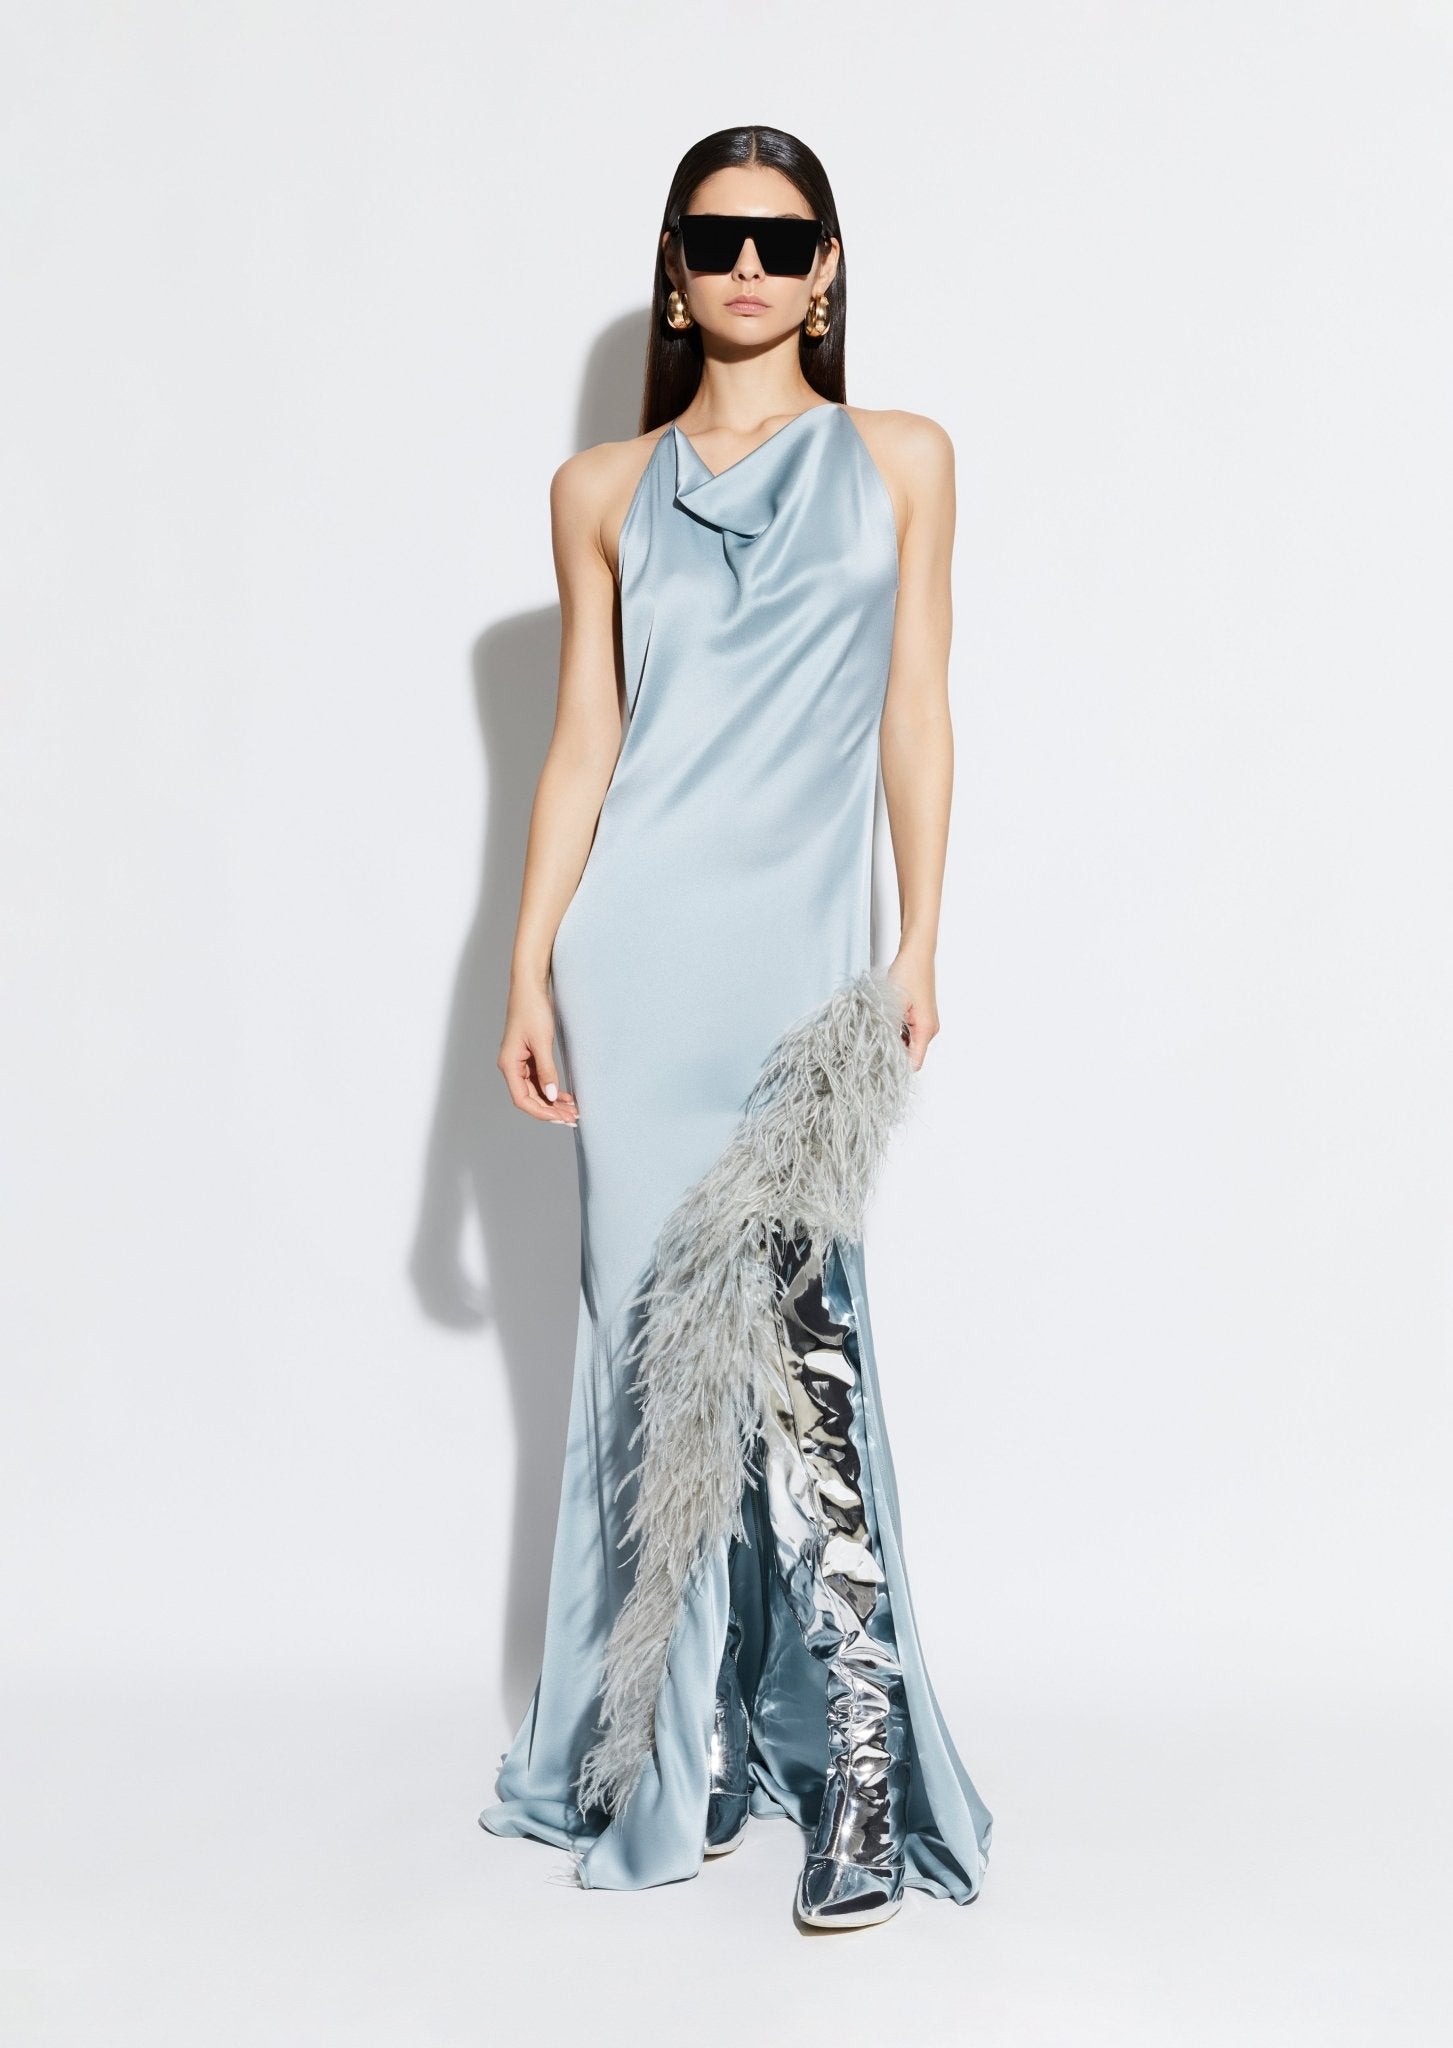 Satin Halter Gown with Feathers - LAPOINTE